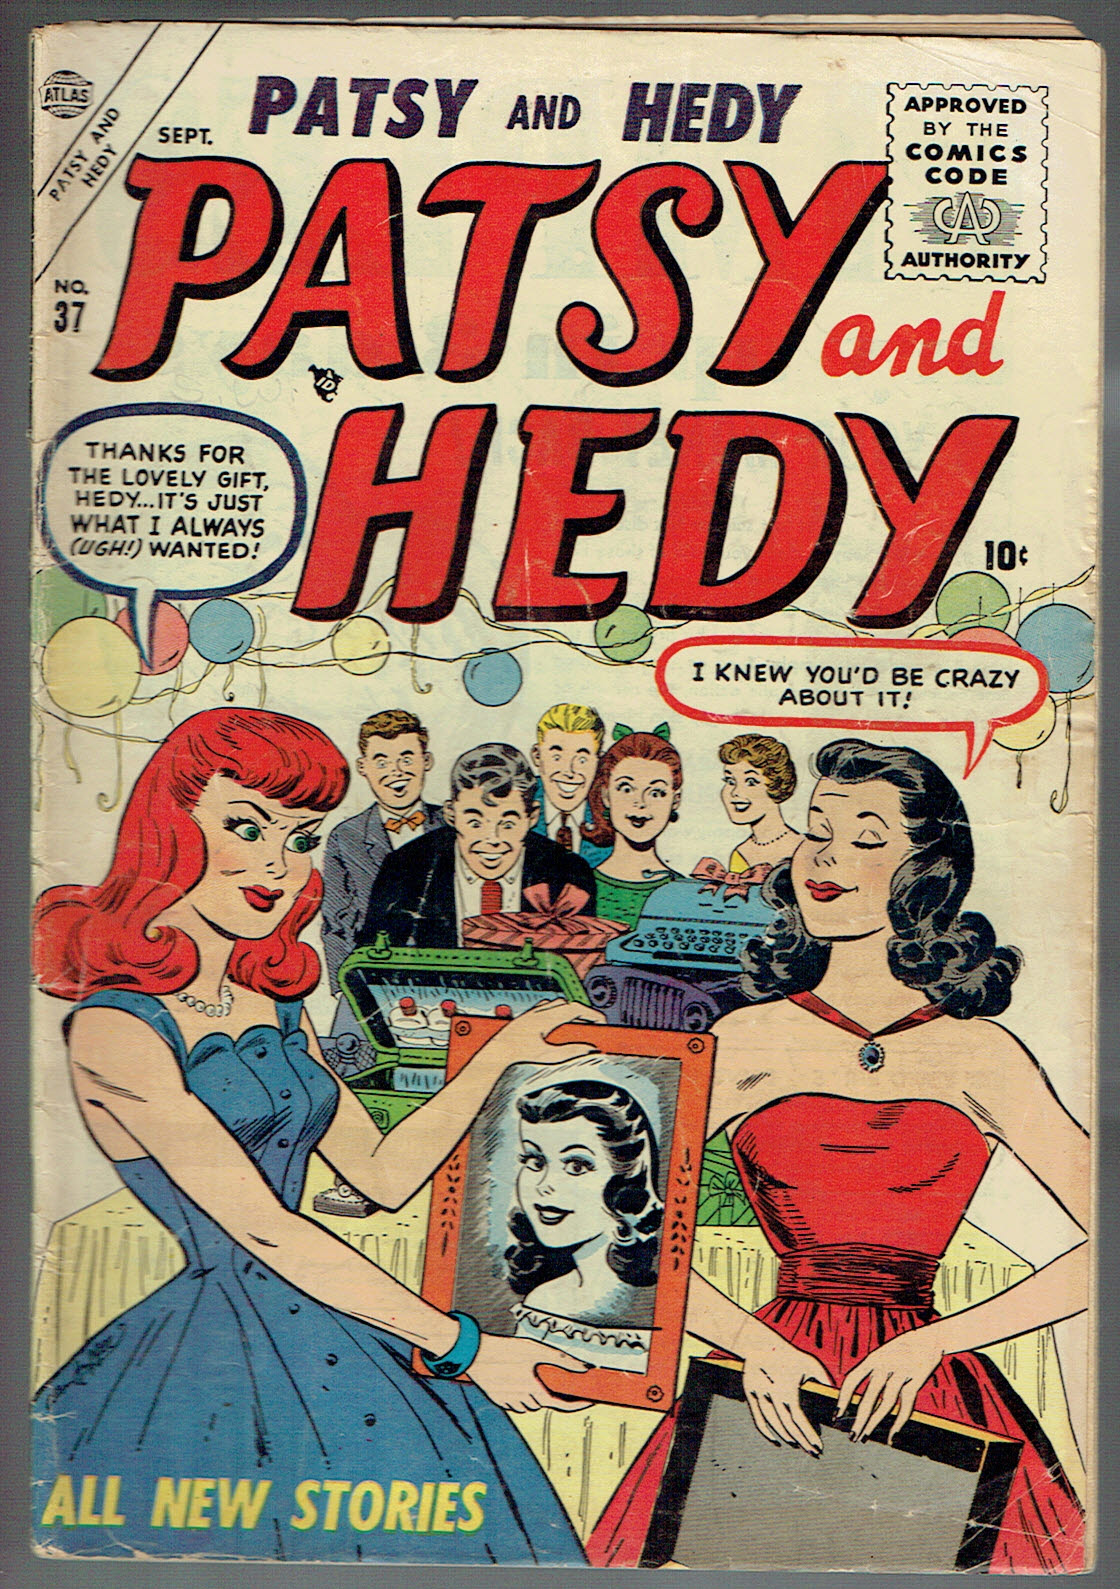 Patsy and Hedy  #37